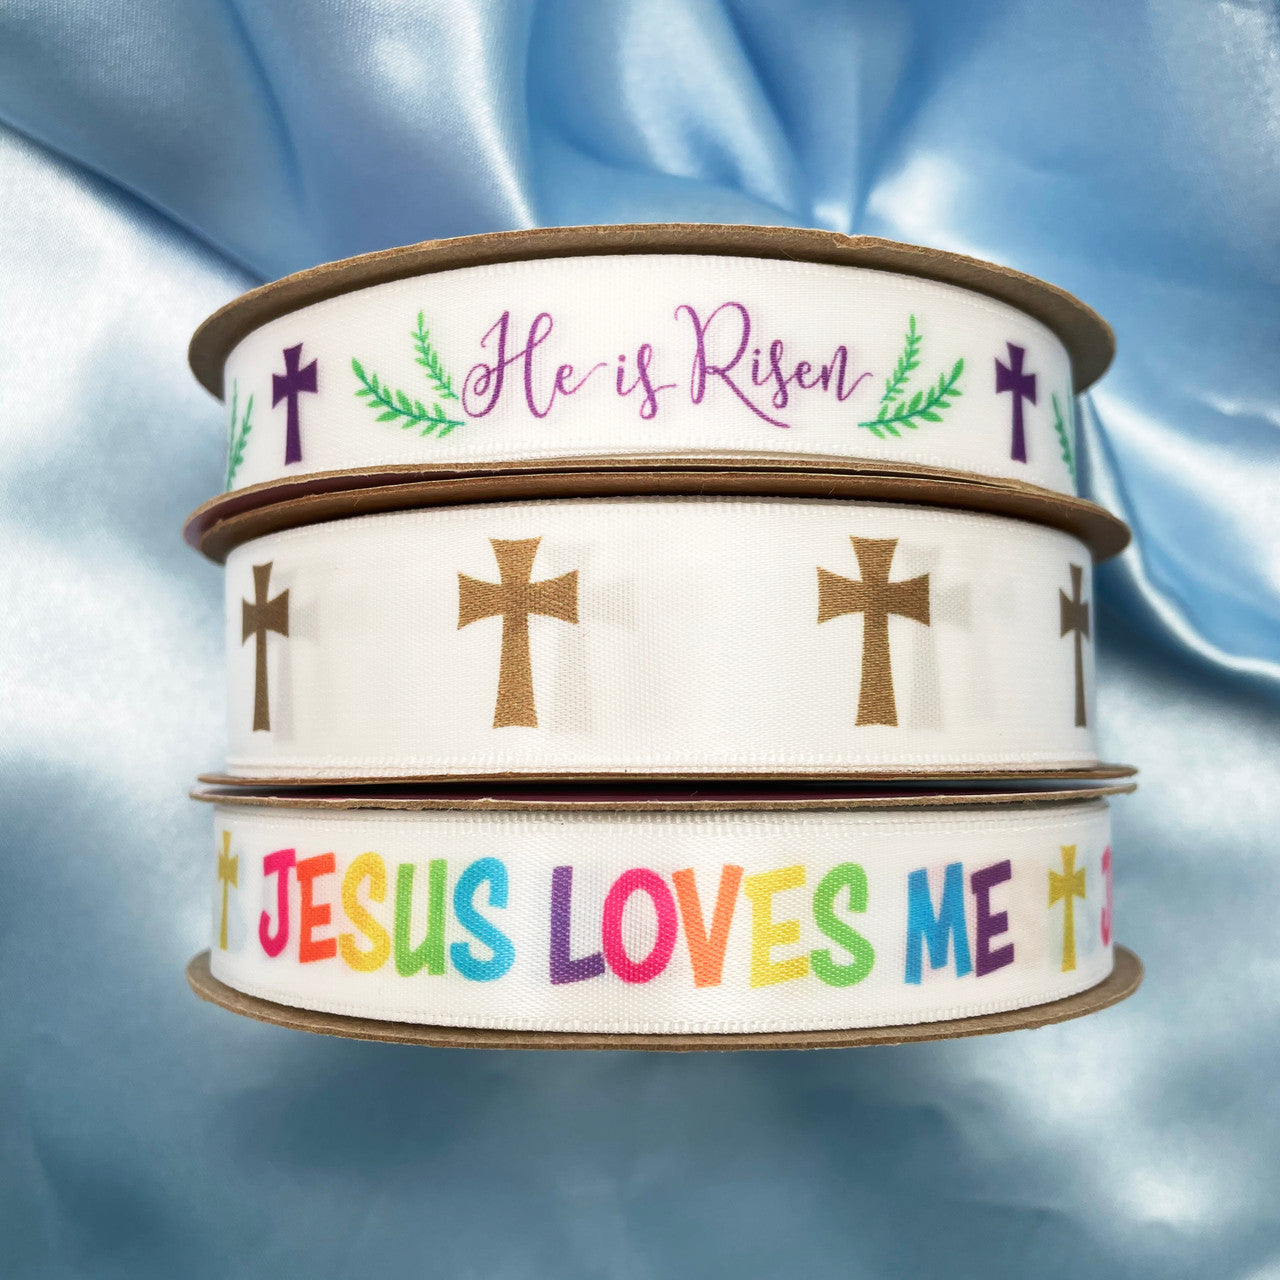 Check our our entire line of Christian themed ribbons!